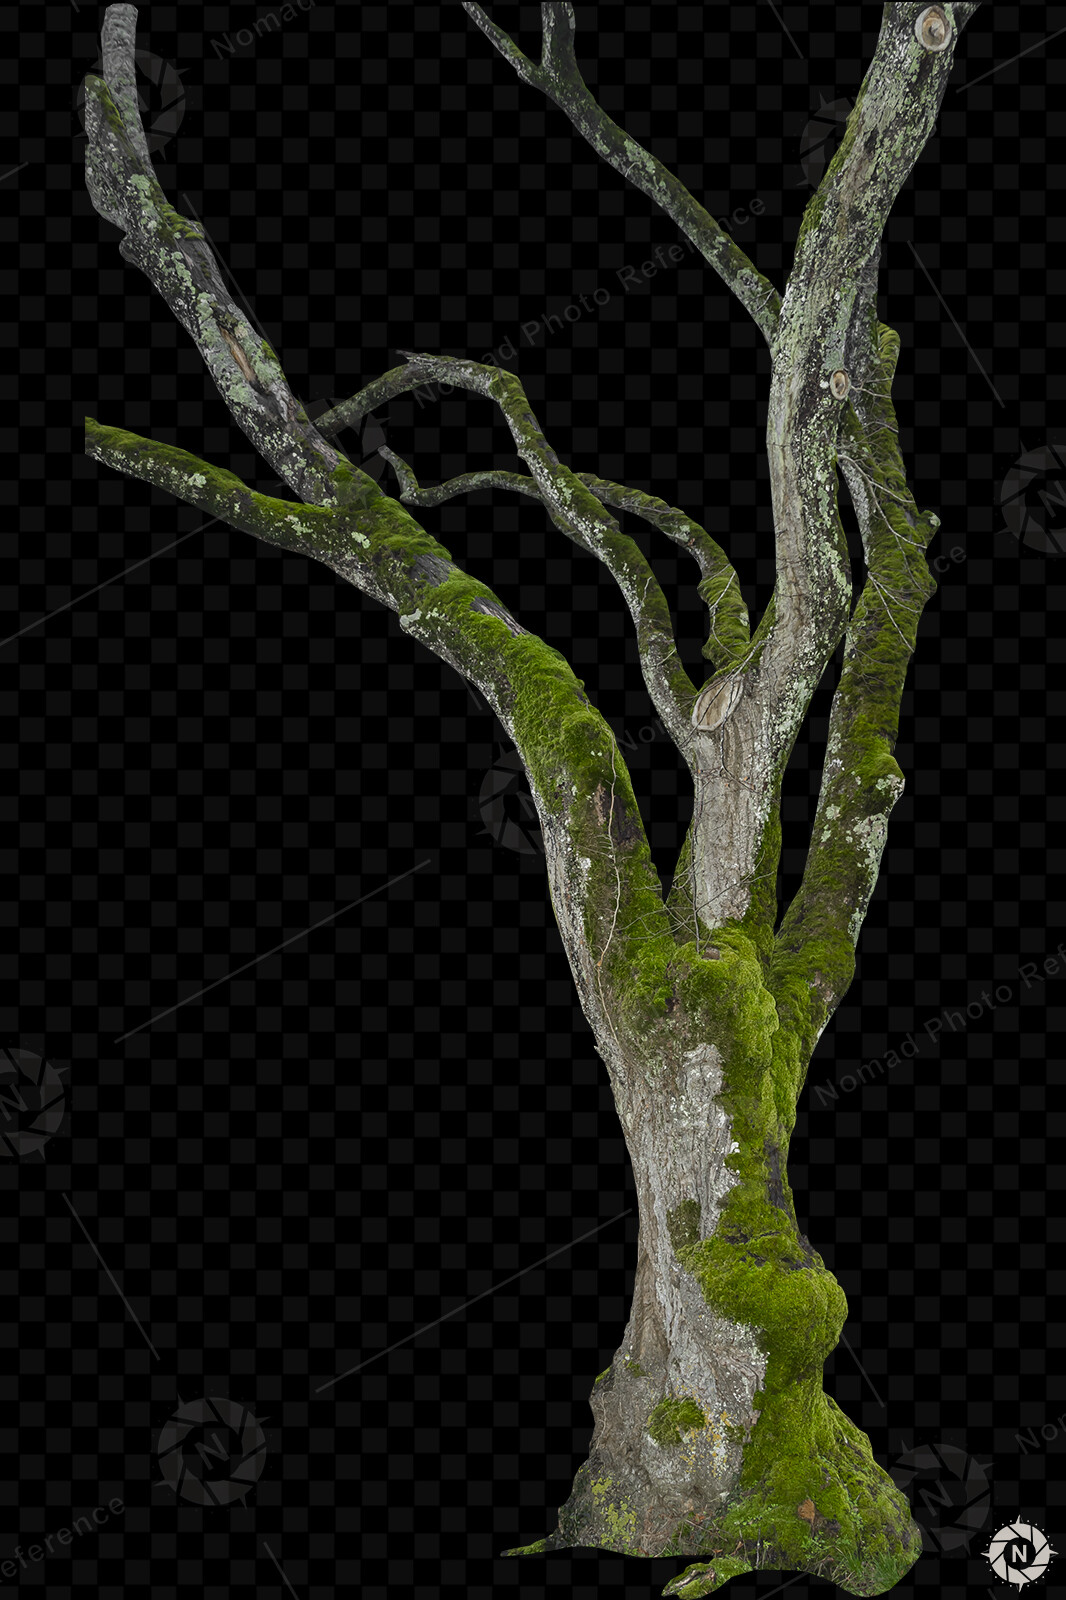 From the PNG Photo Pack: Tree Trunks

https://www.artstation.com/a/2773735